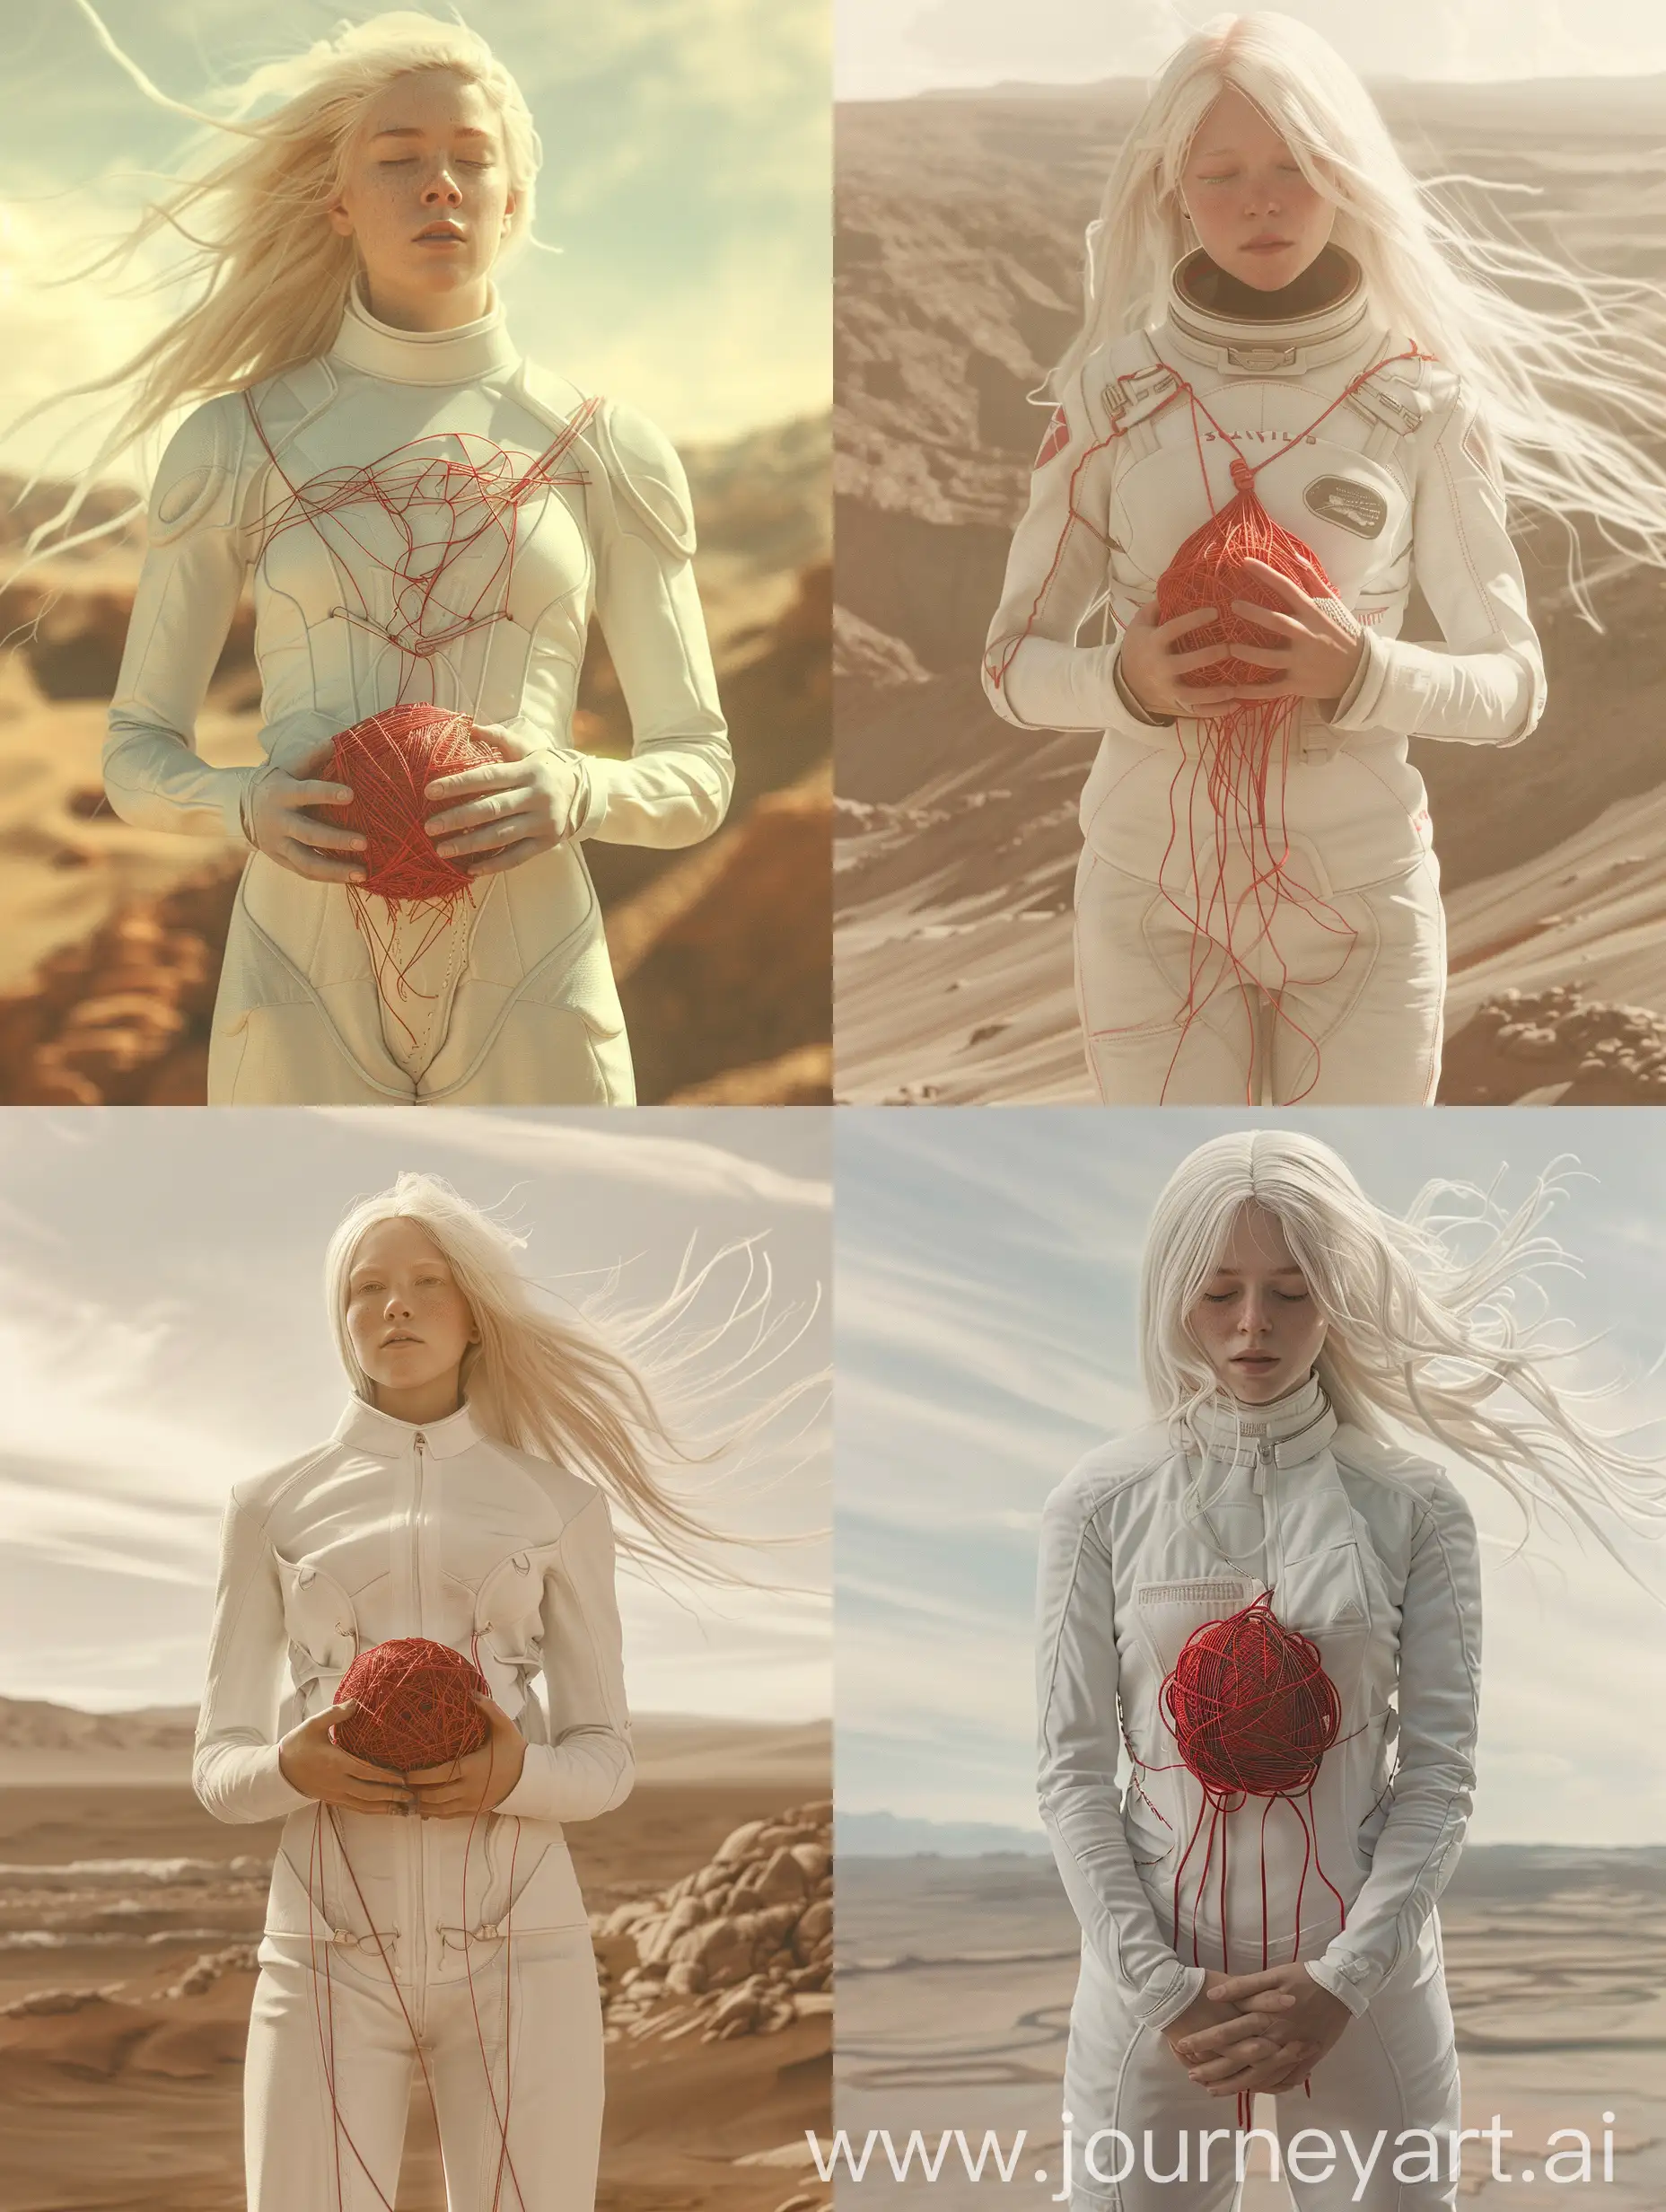 Blonde-Girl-in-White-Space-Suit-Embracing-Red-Threads-on-Mars-Landscape